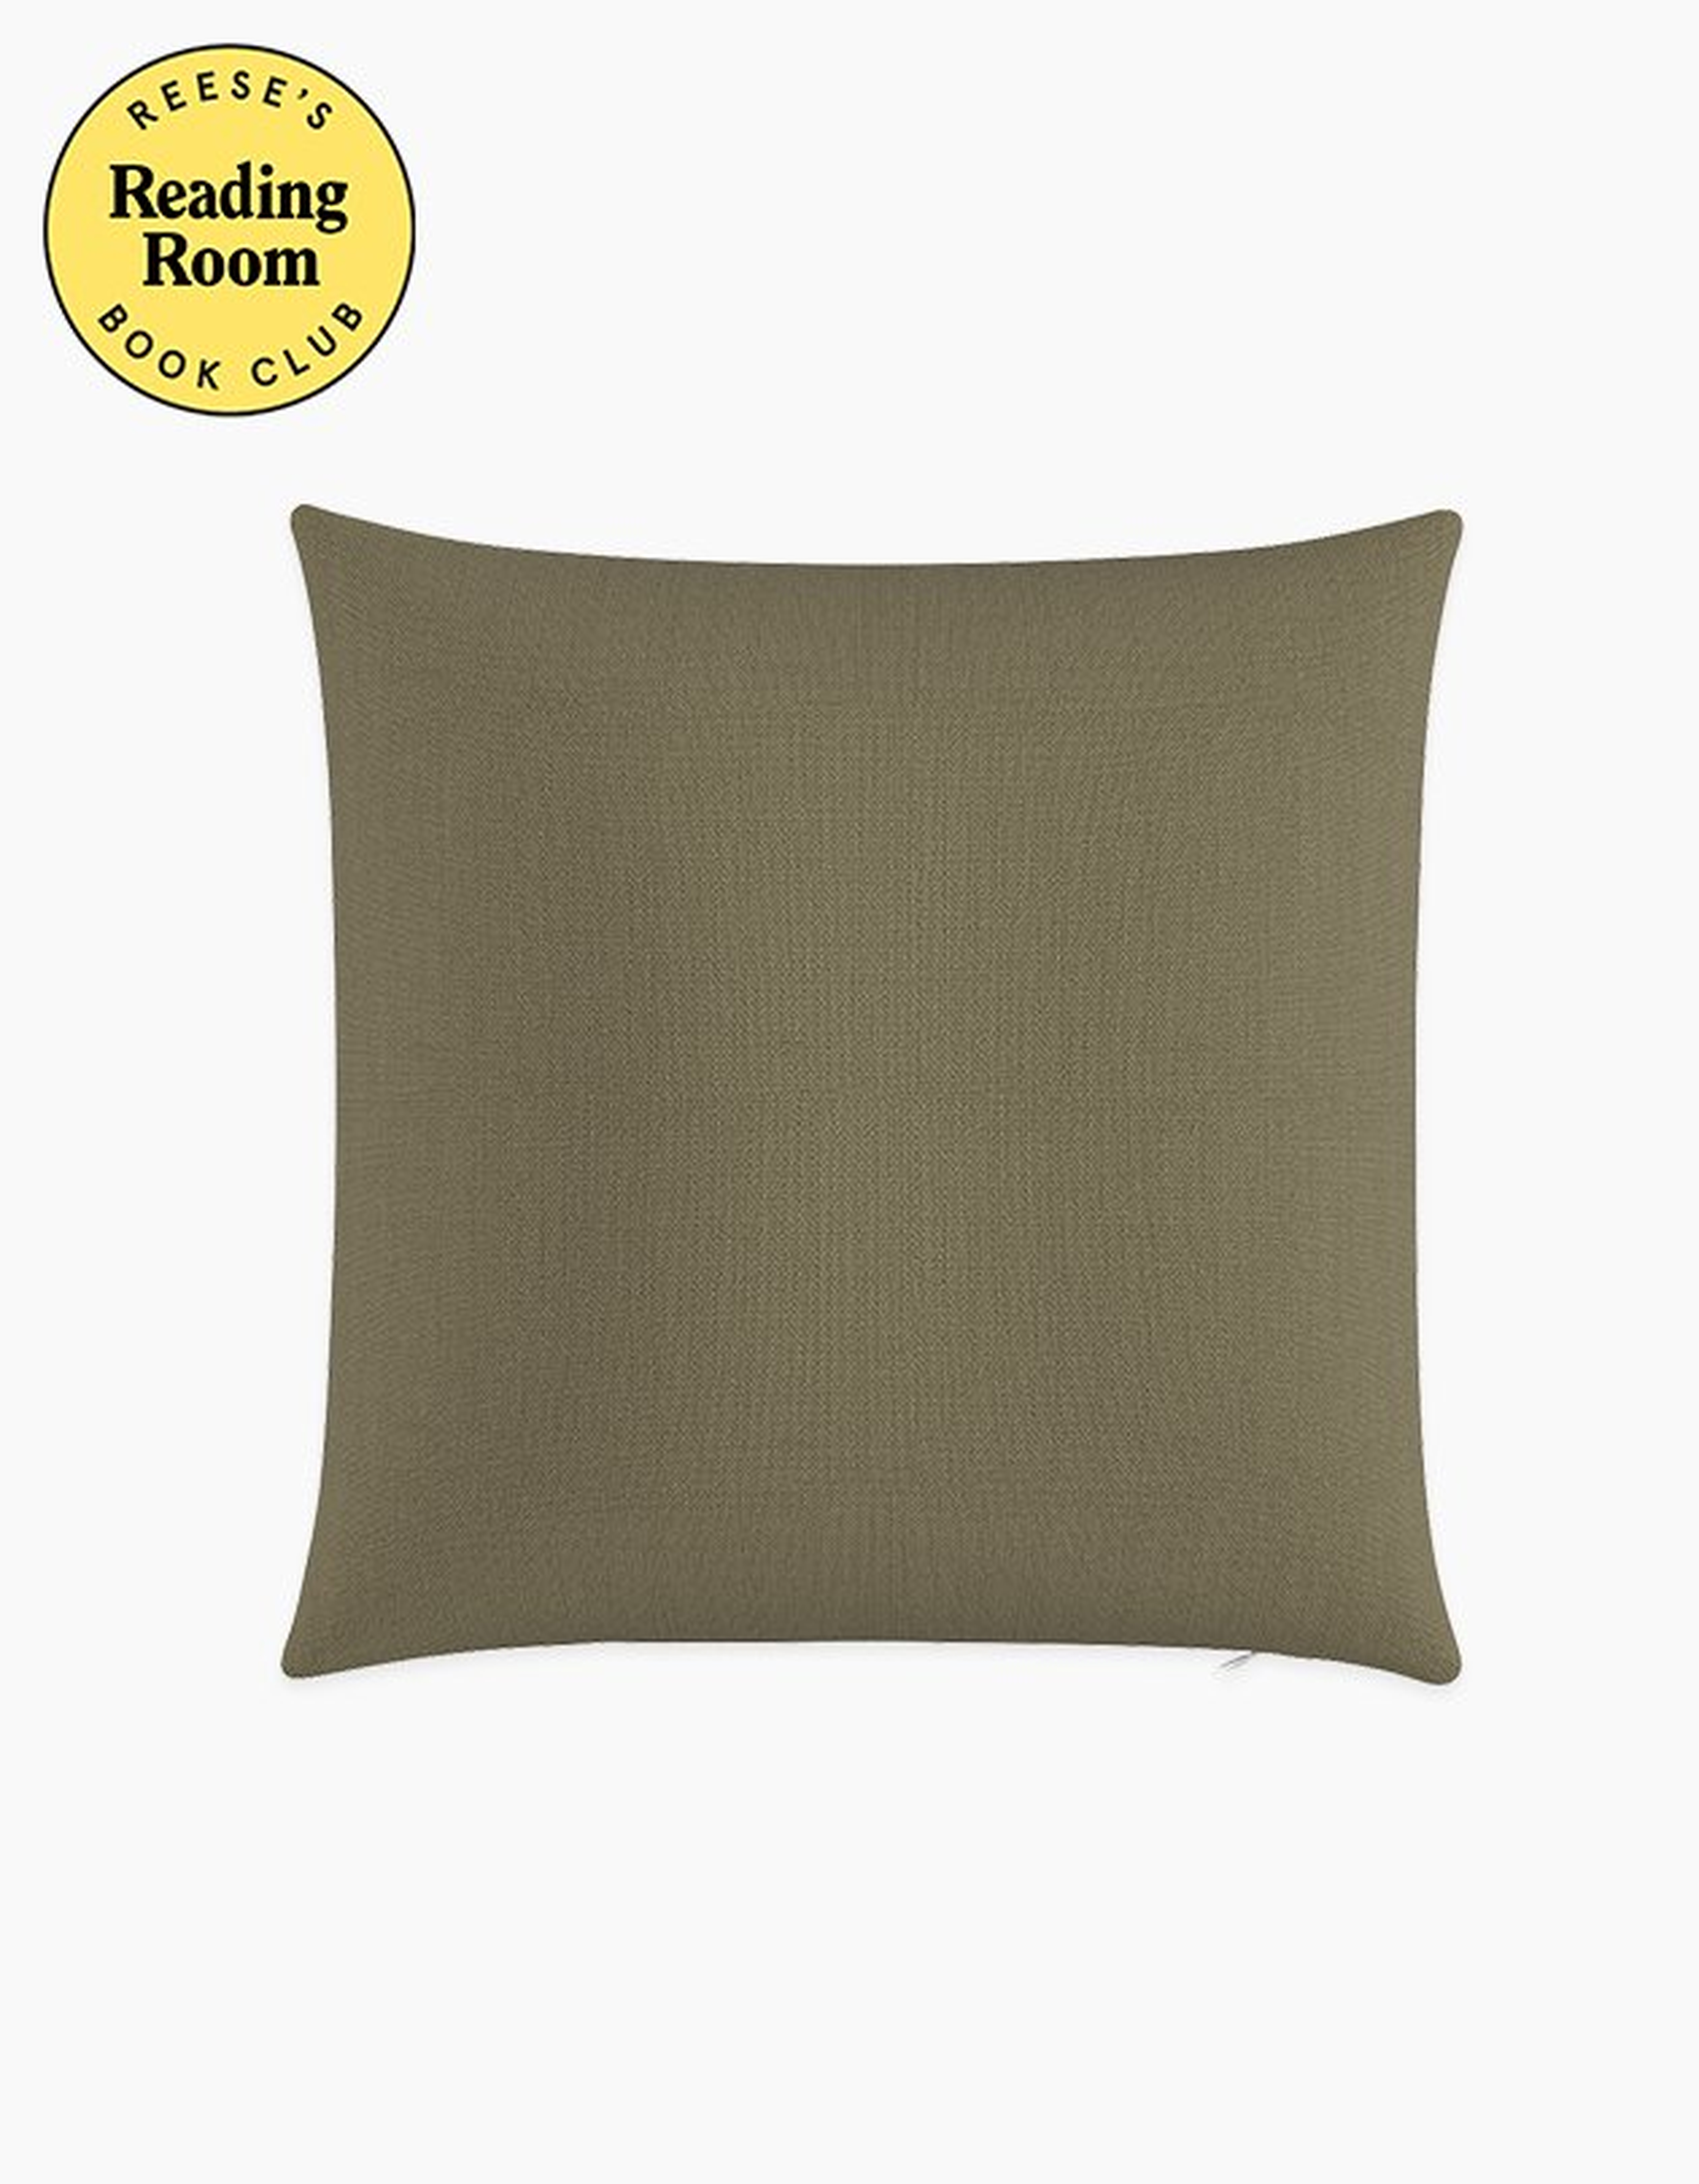 Olive Linen Throw Pillow - 20" x 20" - Reese's Book Club x Havenly